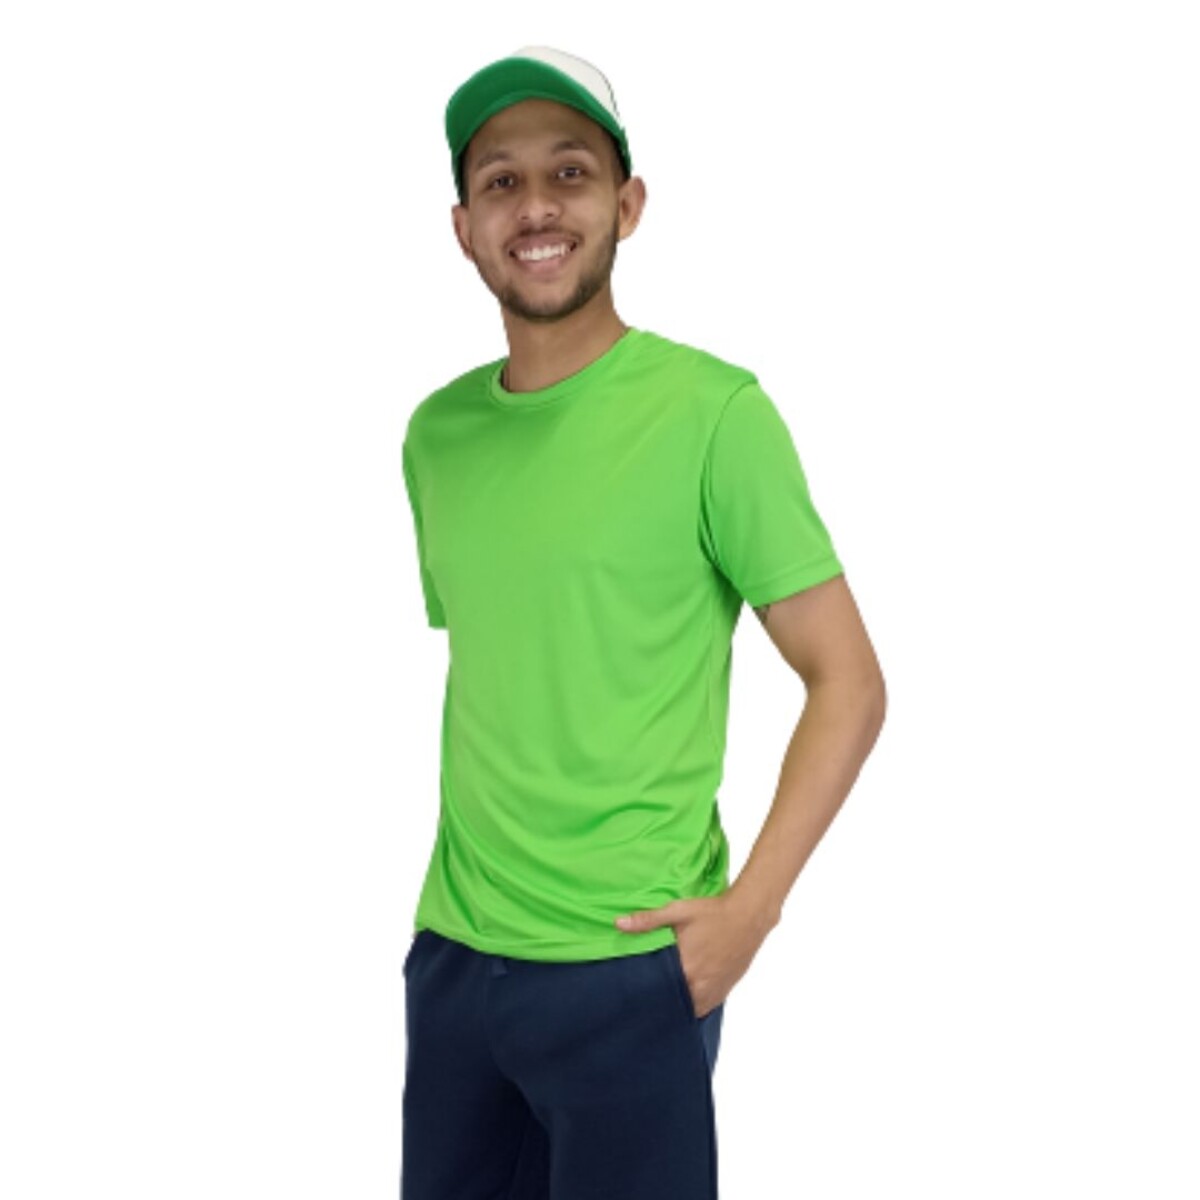 Remera Dry Fit - verde fluor 